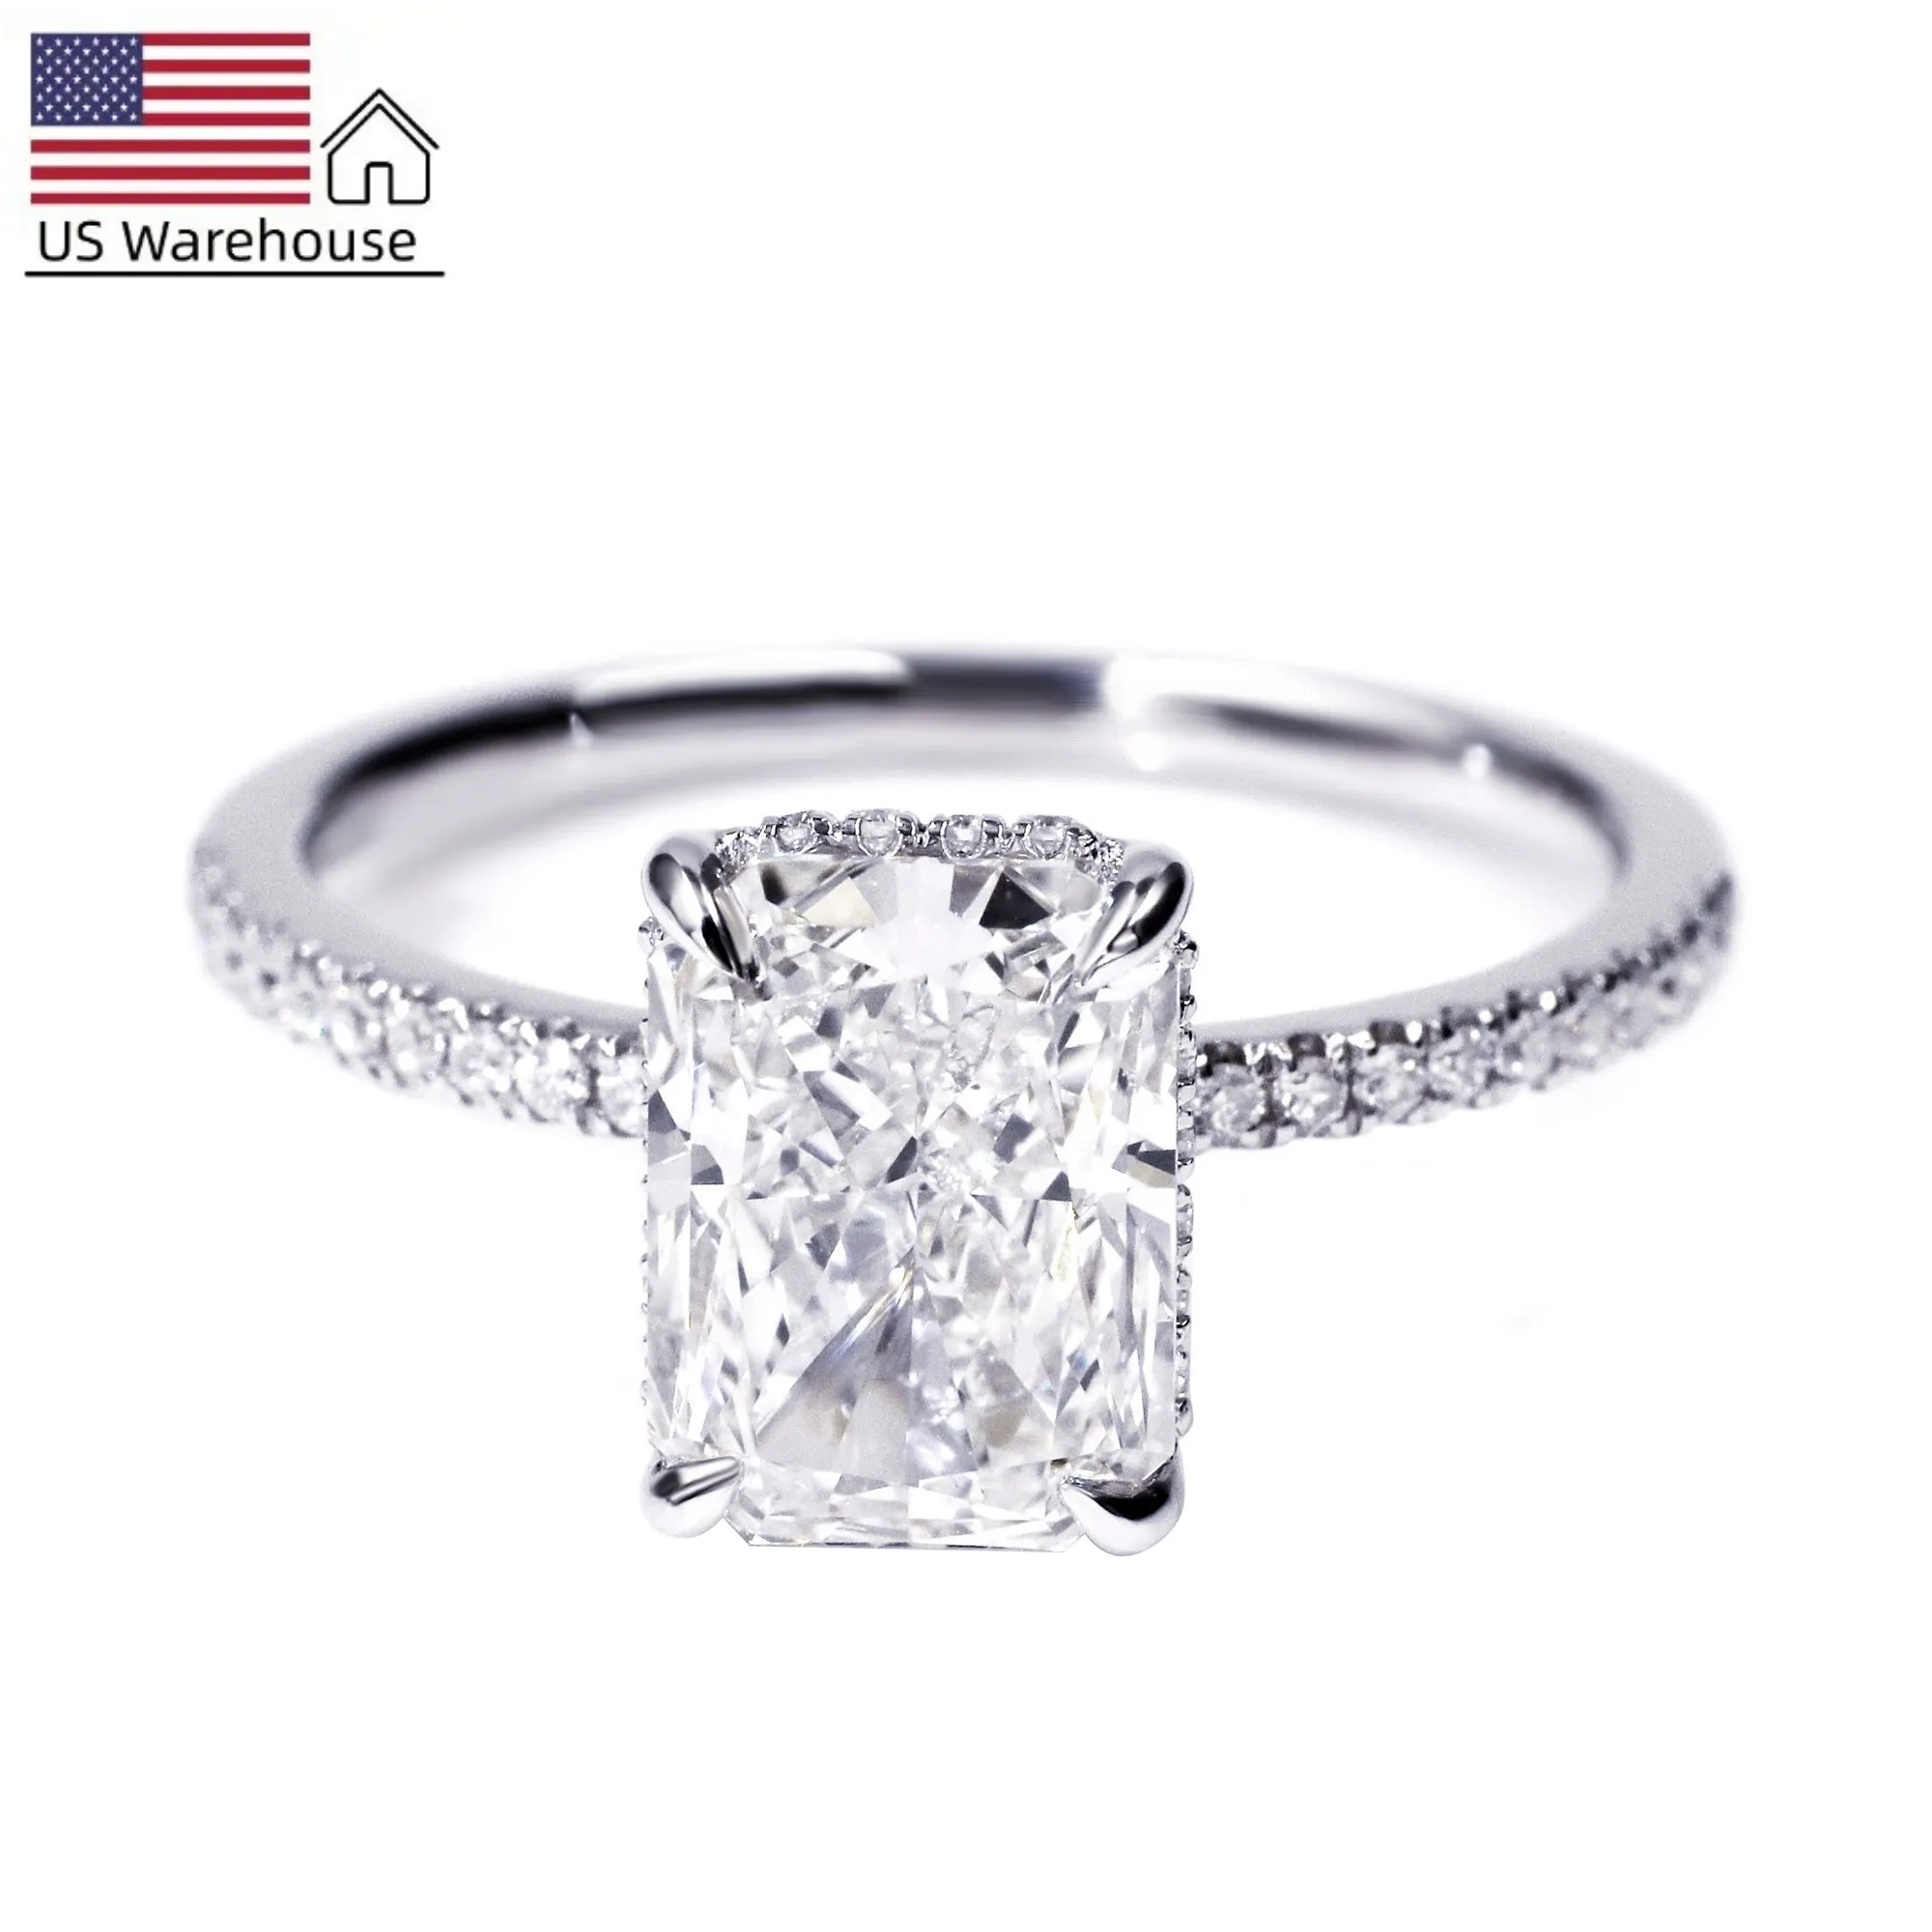 Tianyu Gems FBA 7*9mm Radiant Crushed Ice Cut DEF VVS1 Moissanite Diamond Ring With Hidden Halo Instock For Women